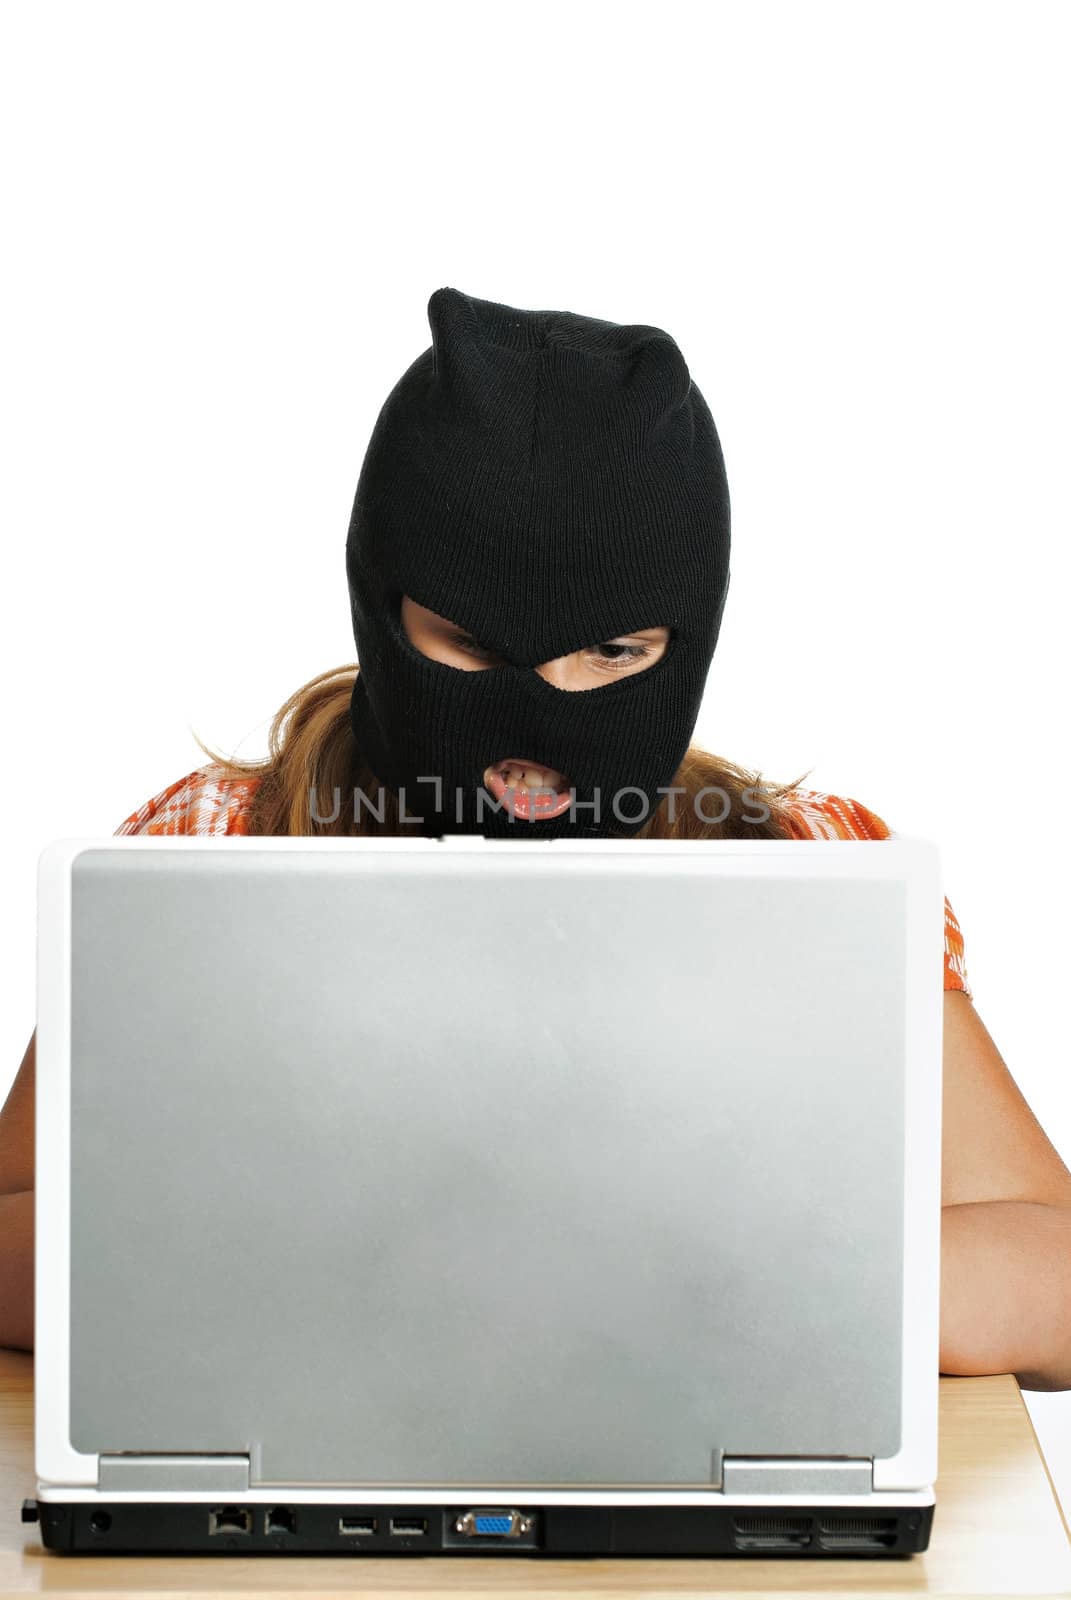 A young child hacker is working on a computer, isolated against a white background.